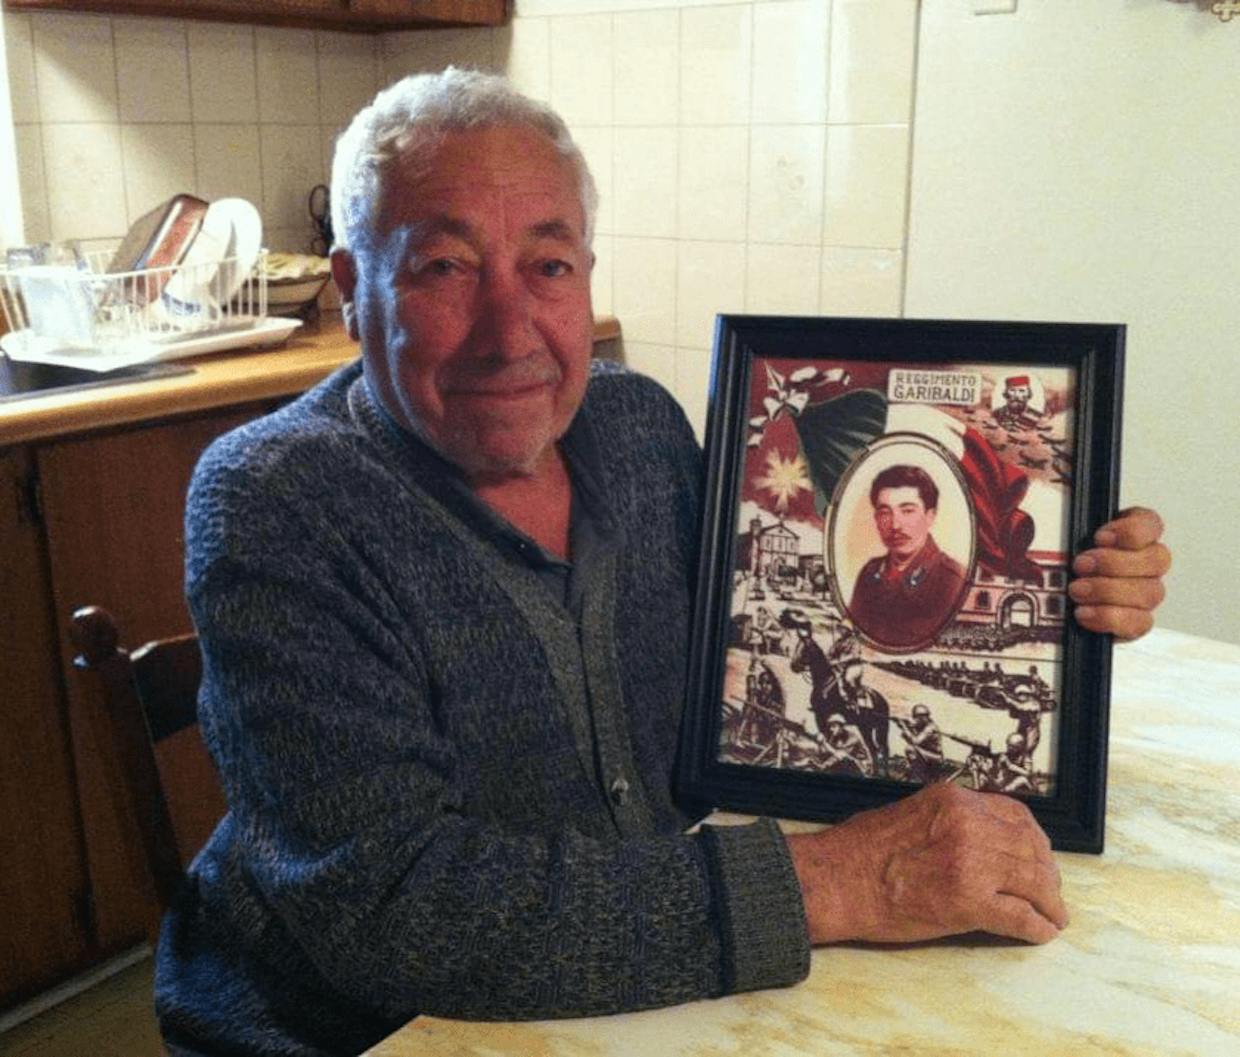 My dad with an enlarged photo of him at 20 years old when he was in the Reggimento  Bersagliero "GaribaldI" in Venice, Italy. He was SO excited when my son (his grandson) surprised him with this ❤